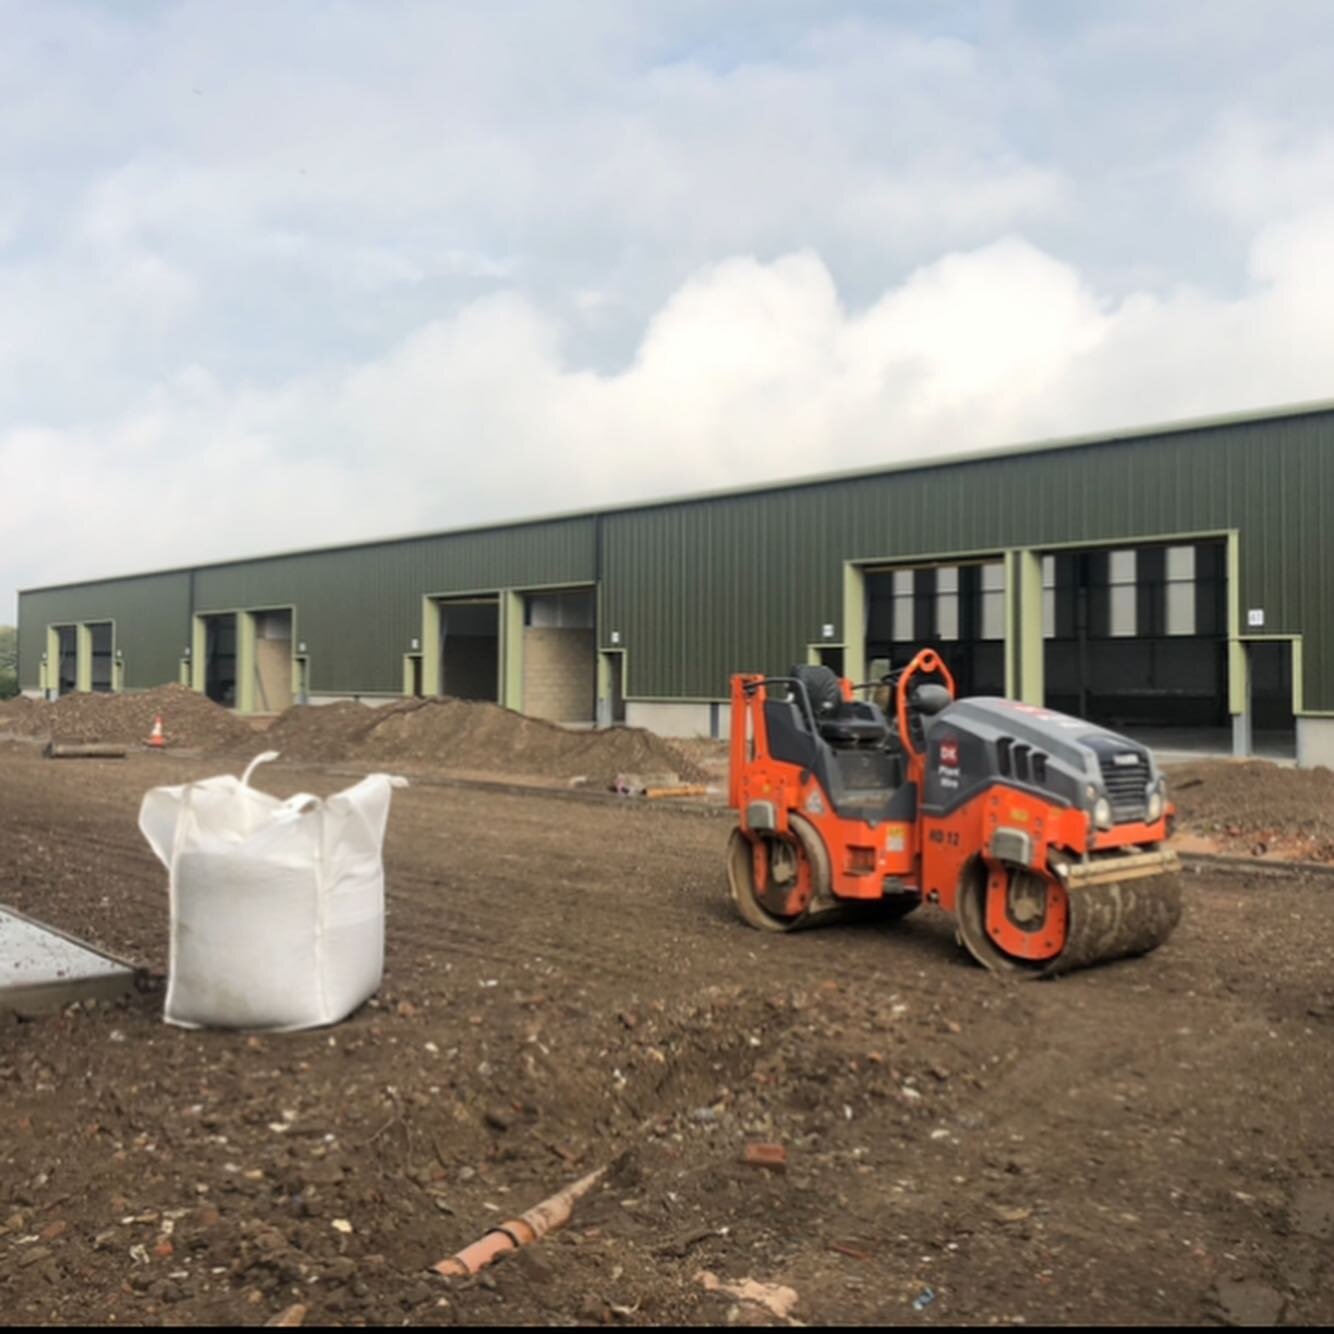 Progress update&hellip;
.
Exactly 12 months after starting this project it is now complete.
.
We did have some last minute delays due to Covid cases but we managed these well and pushed on when we could. We also struggled to finish the tarmac surfaci